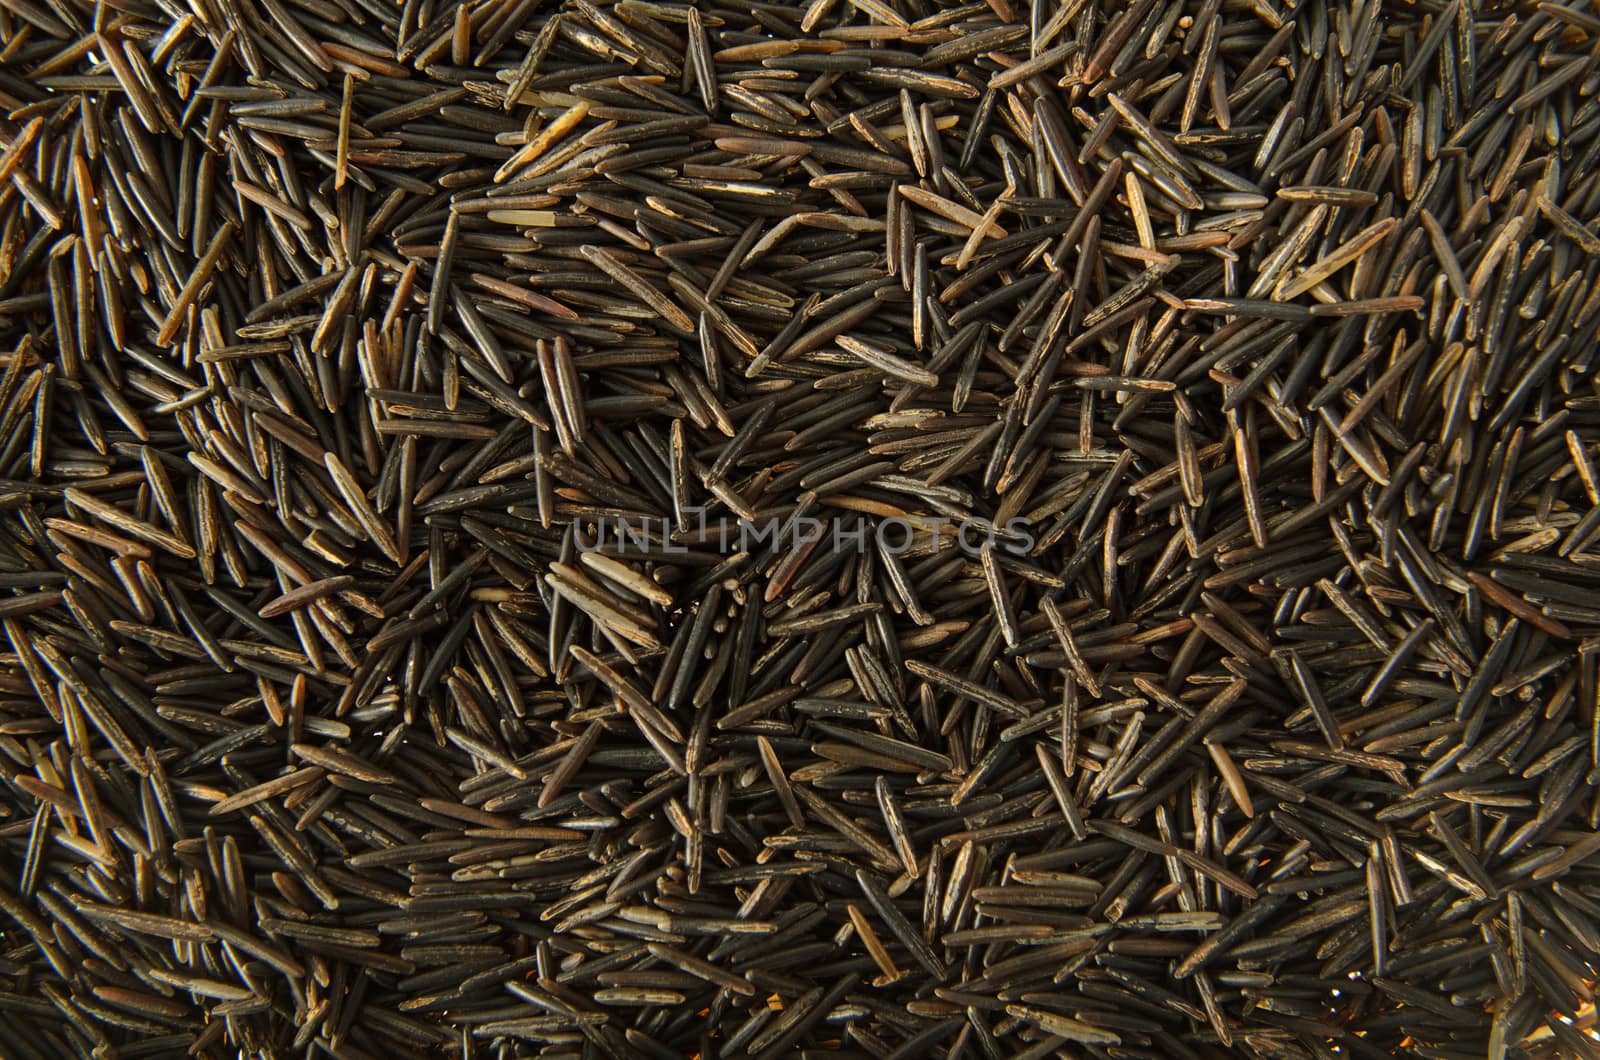 Wild Rice by dragon_fang